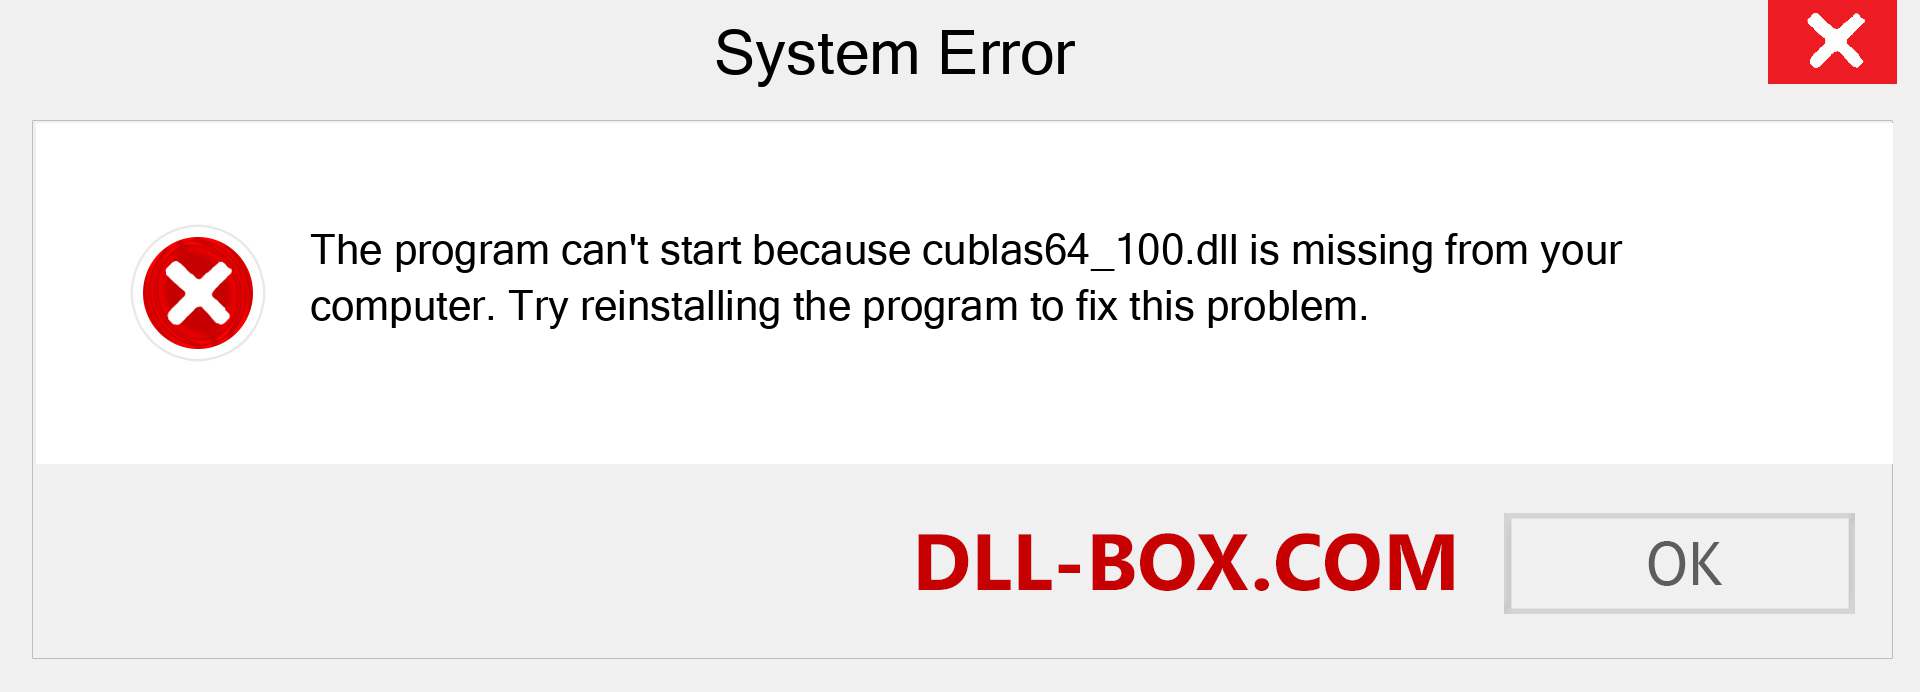  cublas64_100.dll file is missing?. Download for Windows 7, 8, 10 - Fix  cublas64_100 dll Missing Error on Windows, photos, images